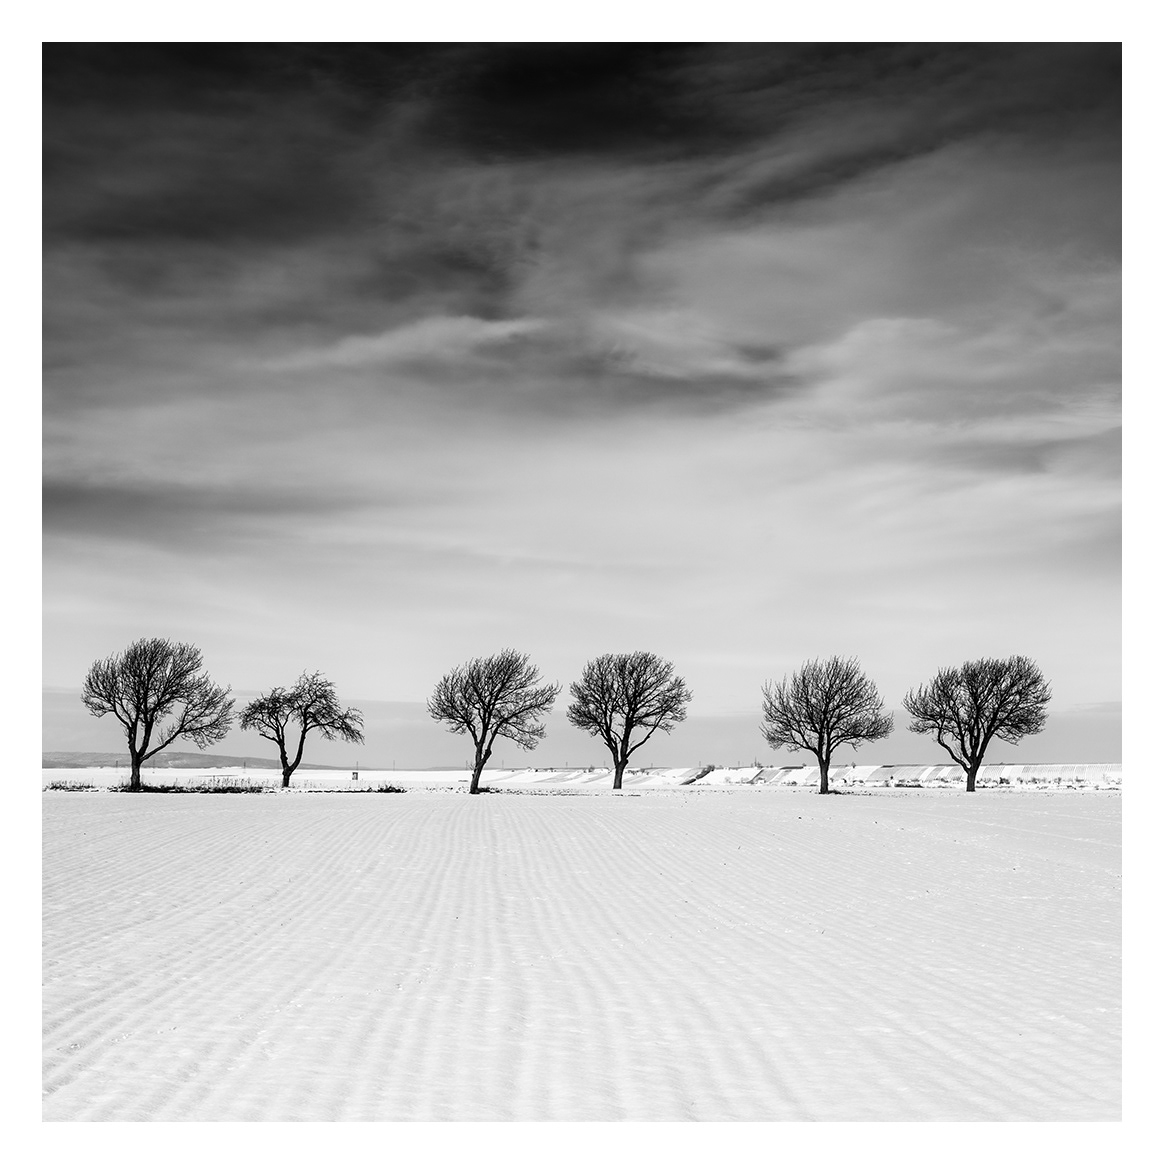 Gerald Berghammer | Six Trees in snowy Field, Winter, Weinviertel, Austria | Available for Sale